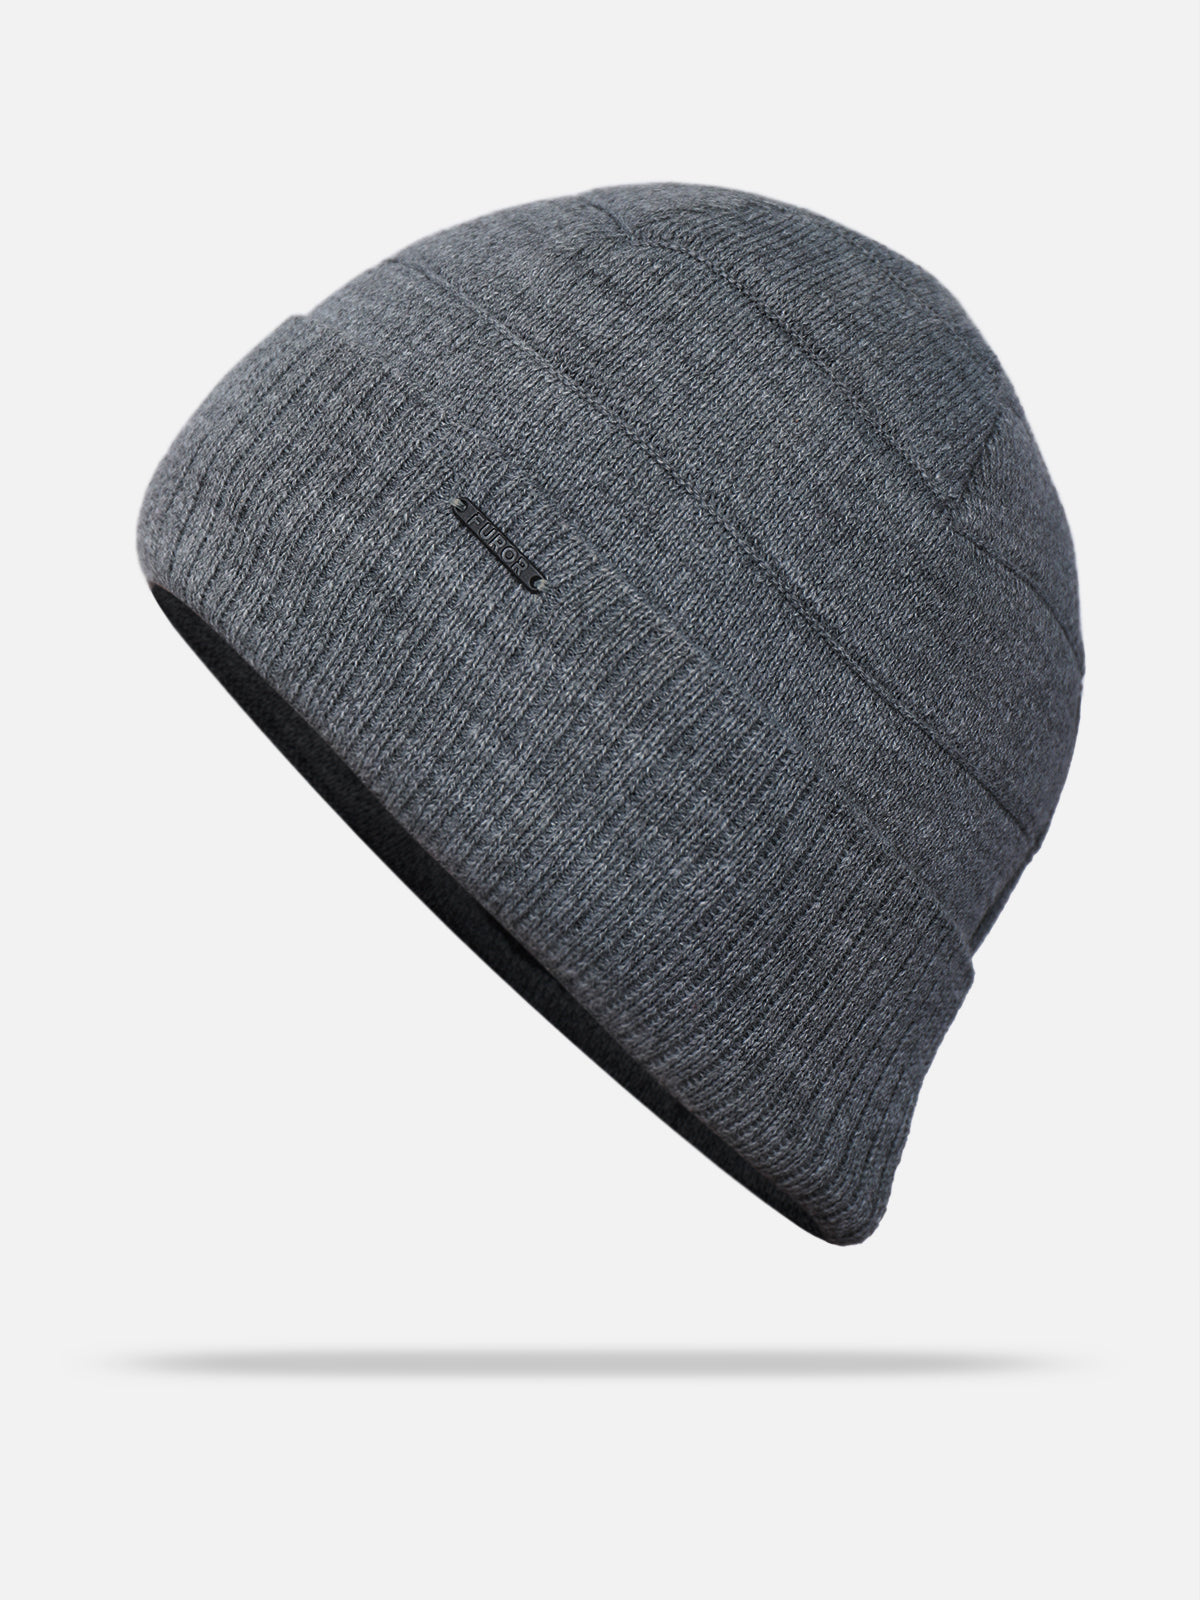 Grey Knitted Beanie - FABC21-006